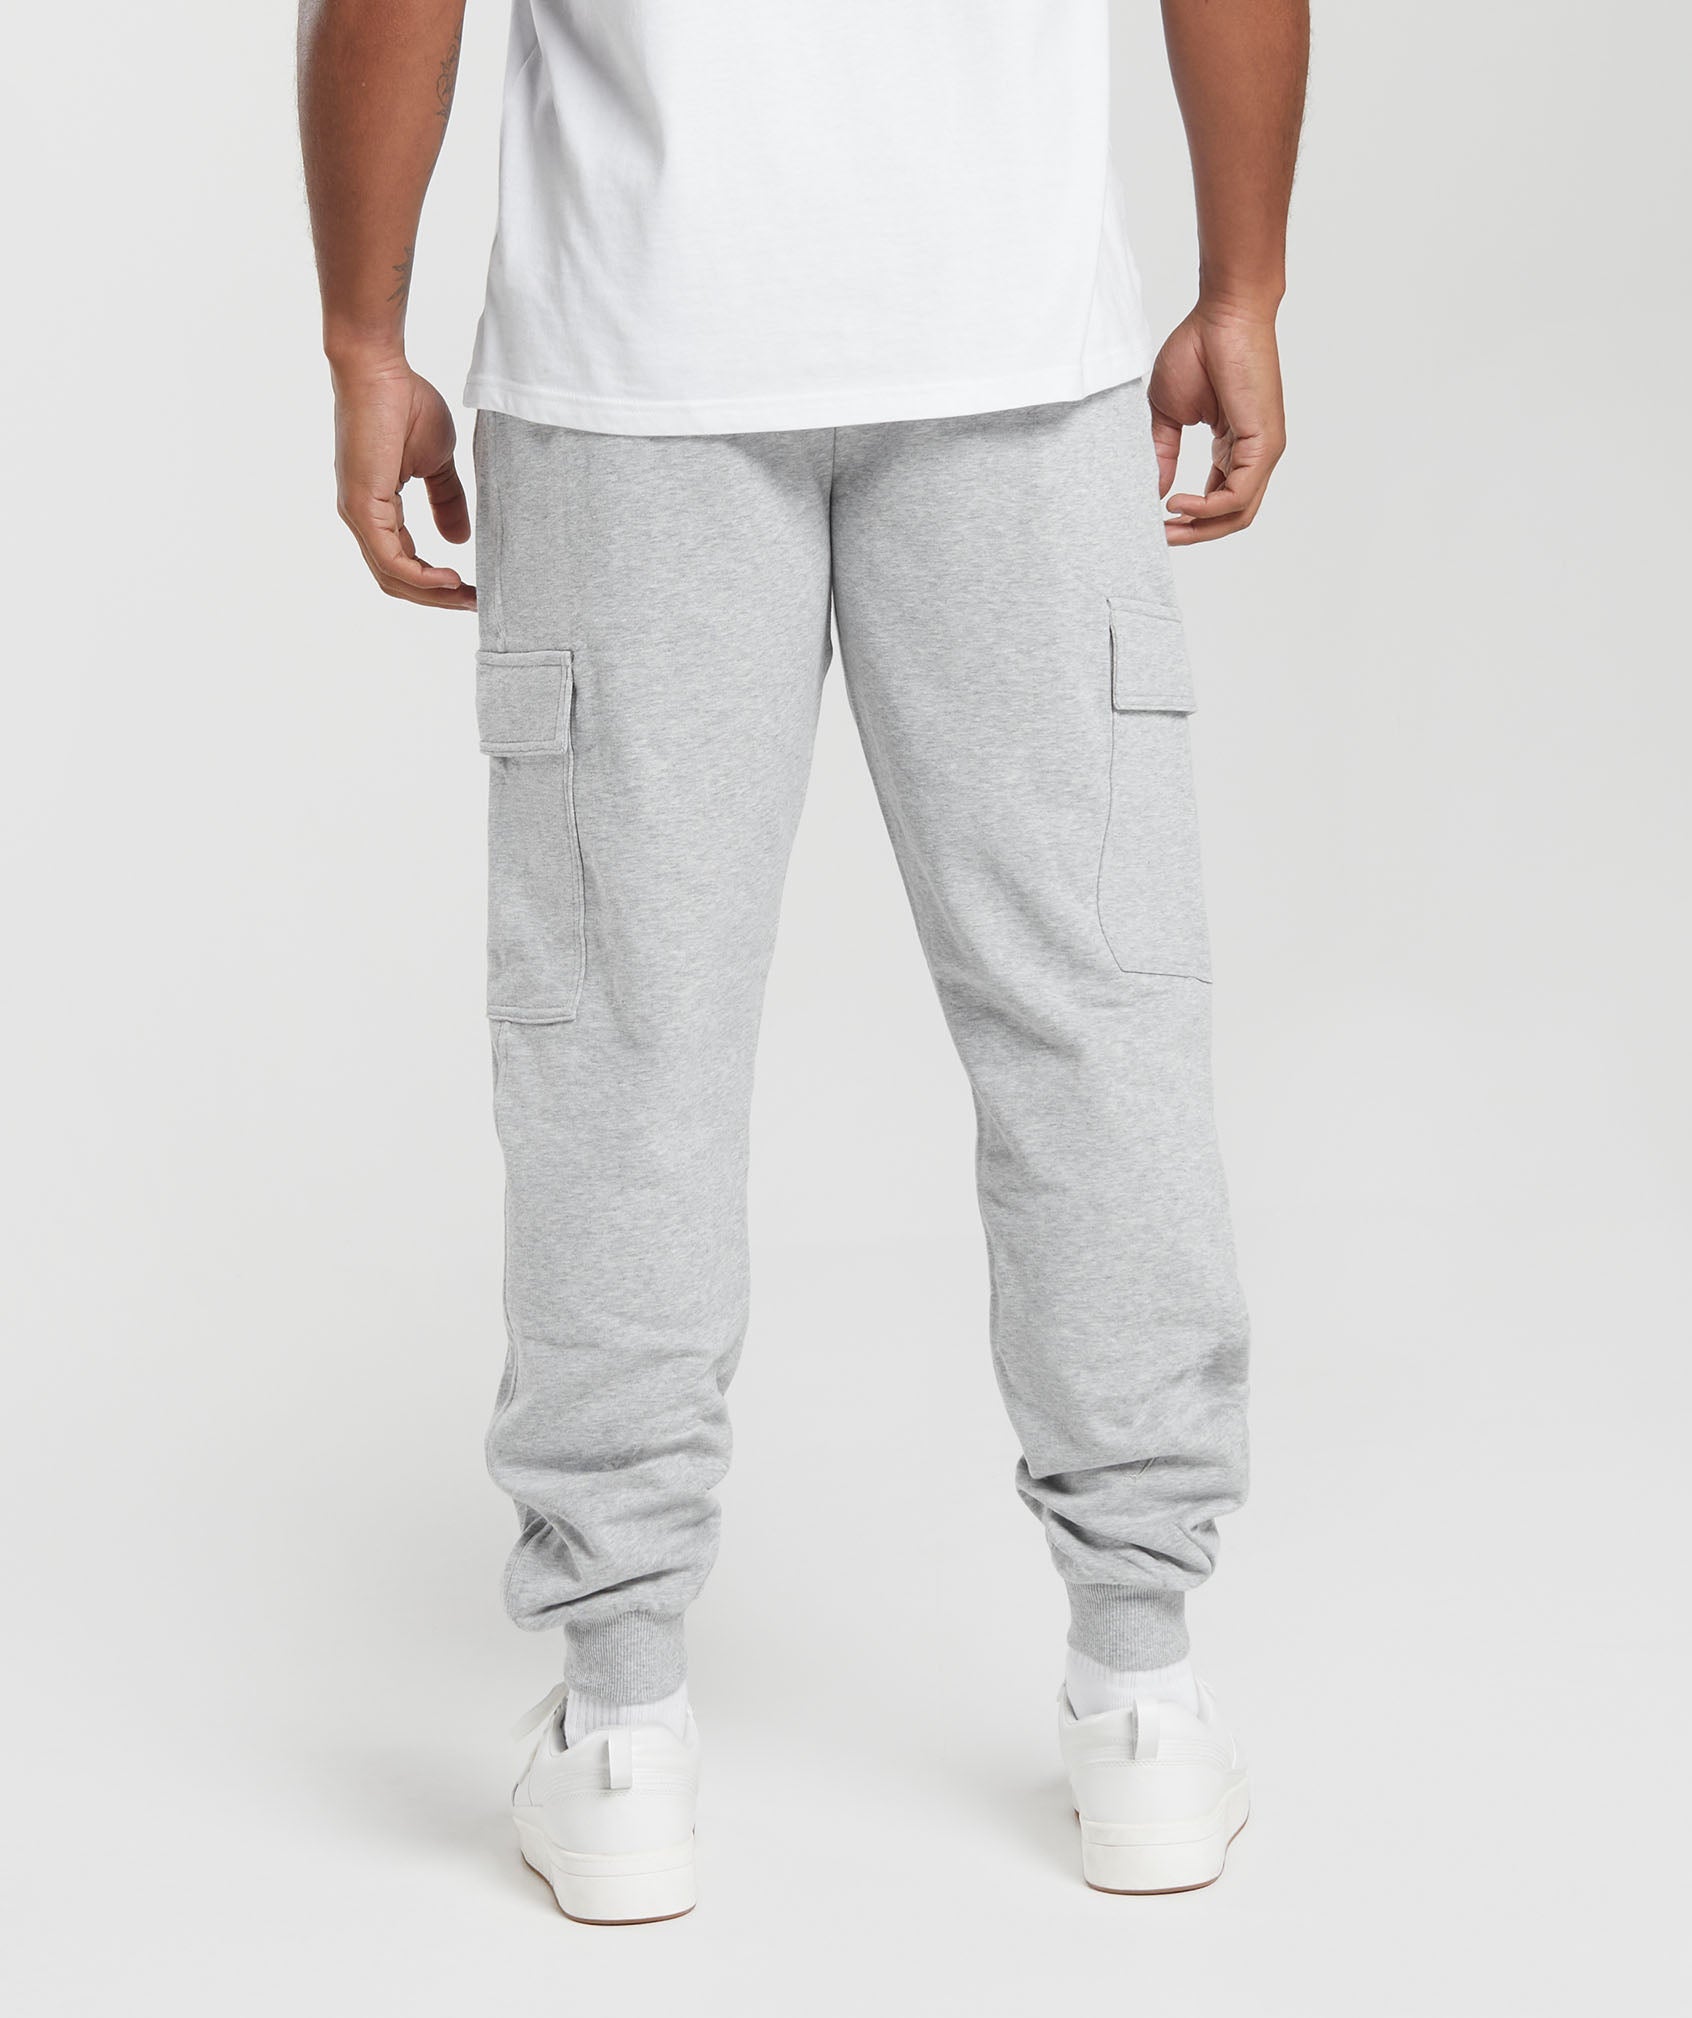 Rest Day Essentials Cargo Joggers in Light Grey Core Marl - view 2